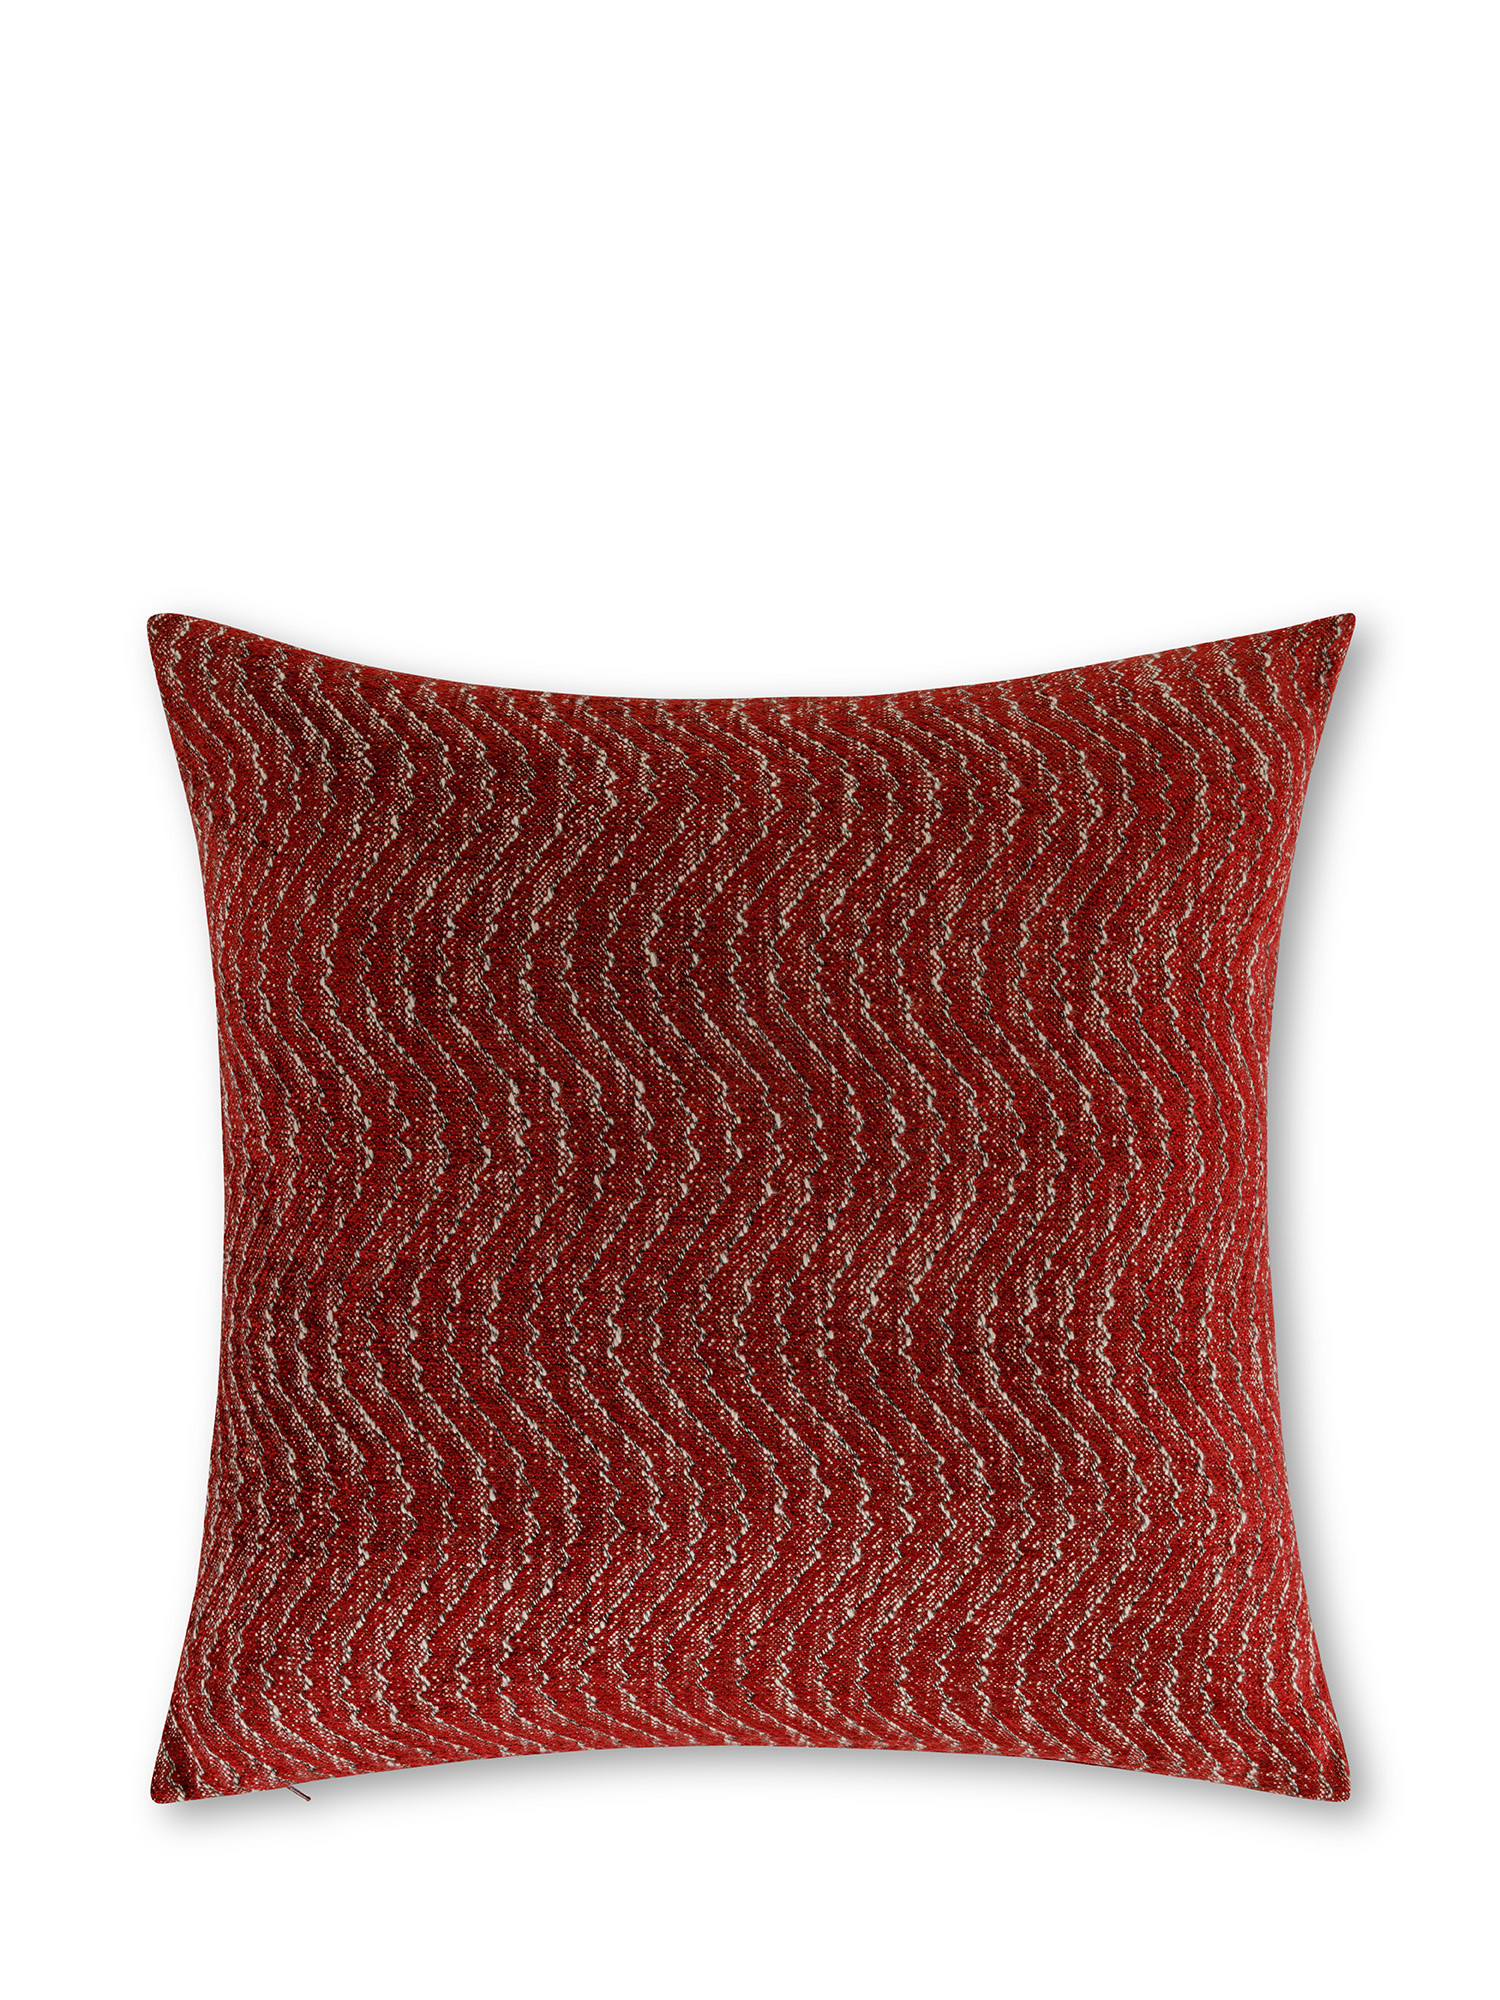 Cushion in jacquard fabric with relief pattern 45x45 cm, Red, large image number 0